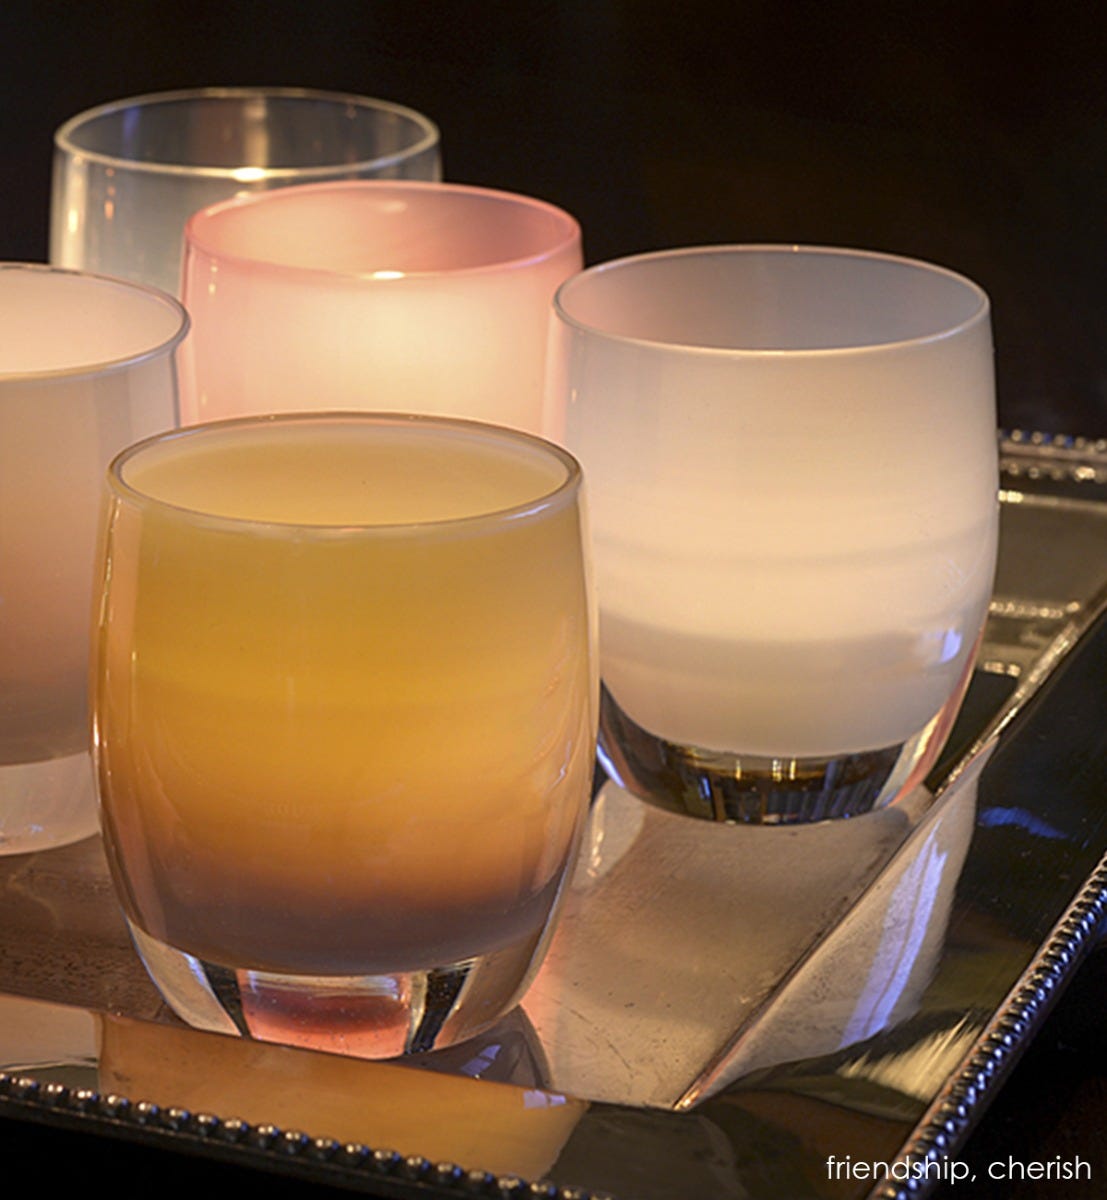 cherish daisy white hand-blown glass votive candle holder. Paired with friendship.